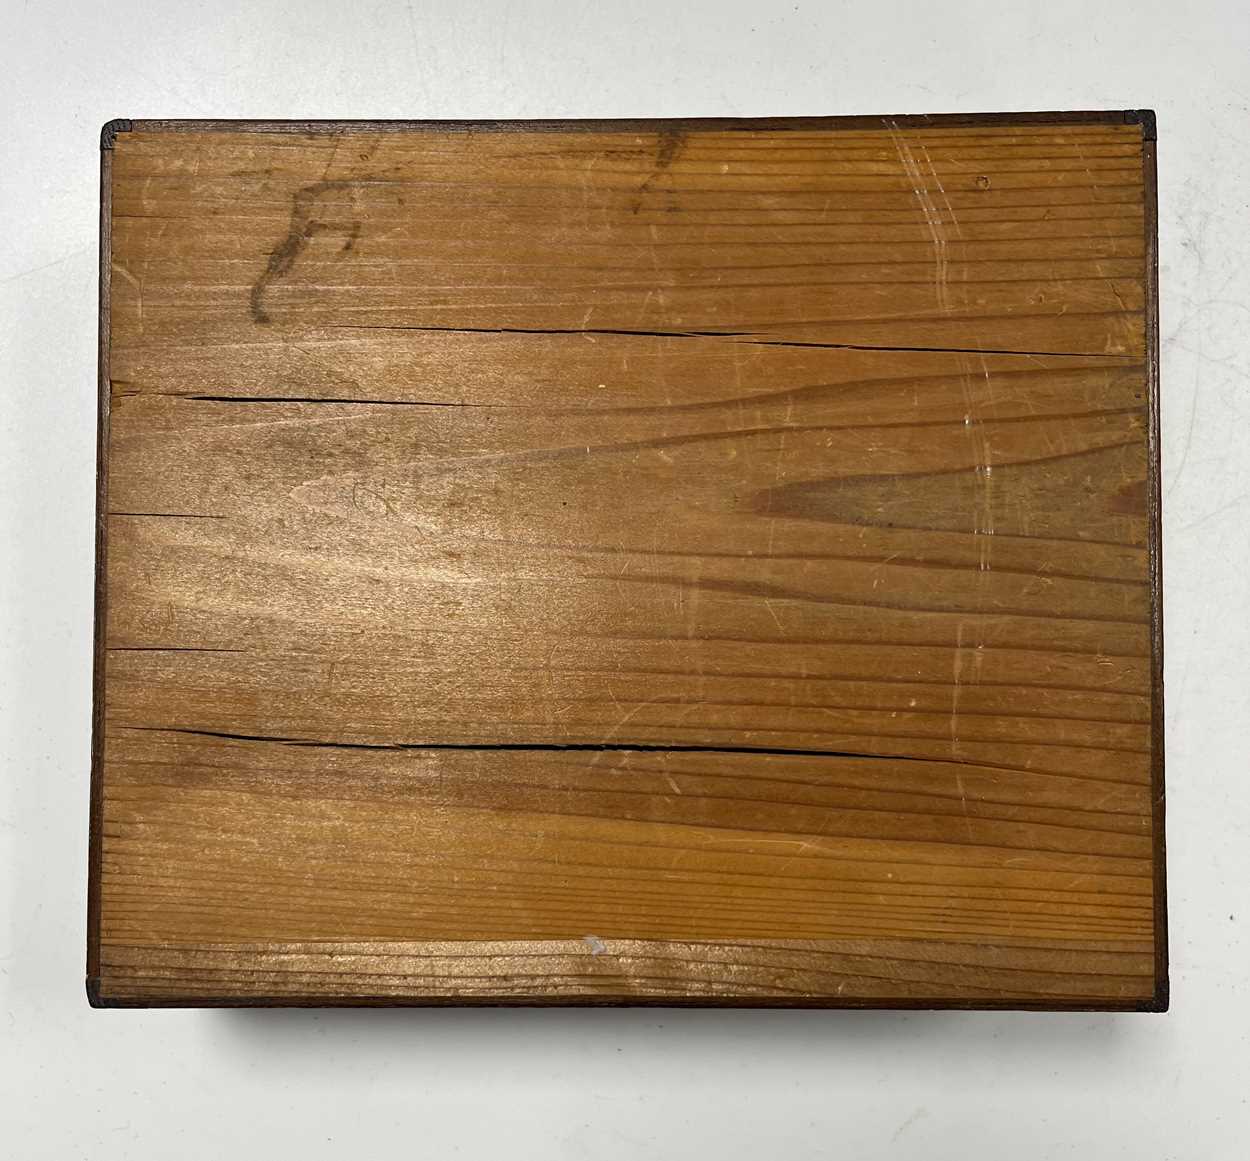 Attributed to Arthur W. Simpson (1857-1922) of Kendal, a pine table box, - Image 7 of 8